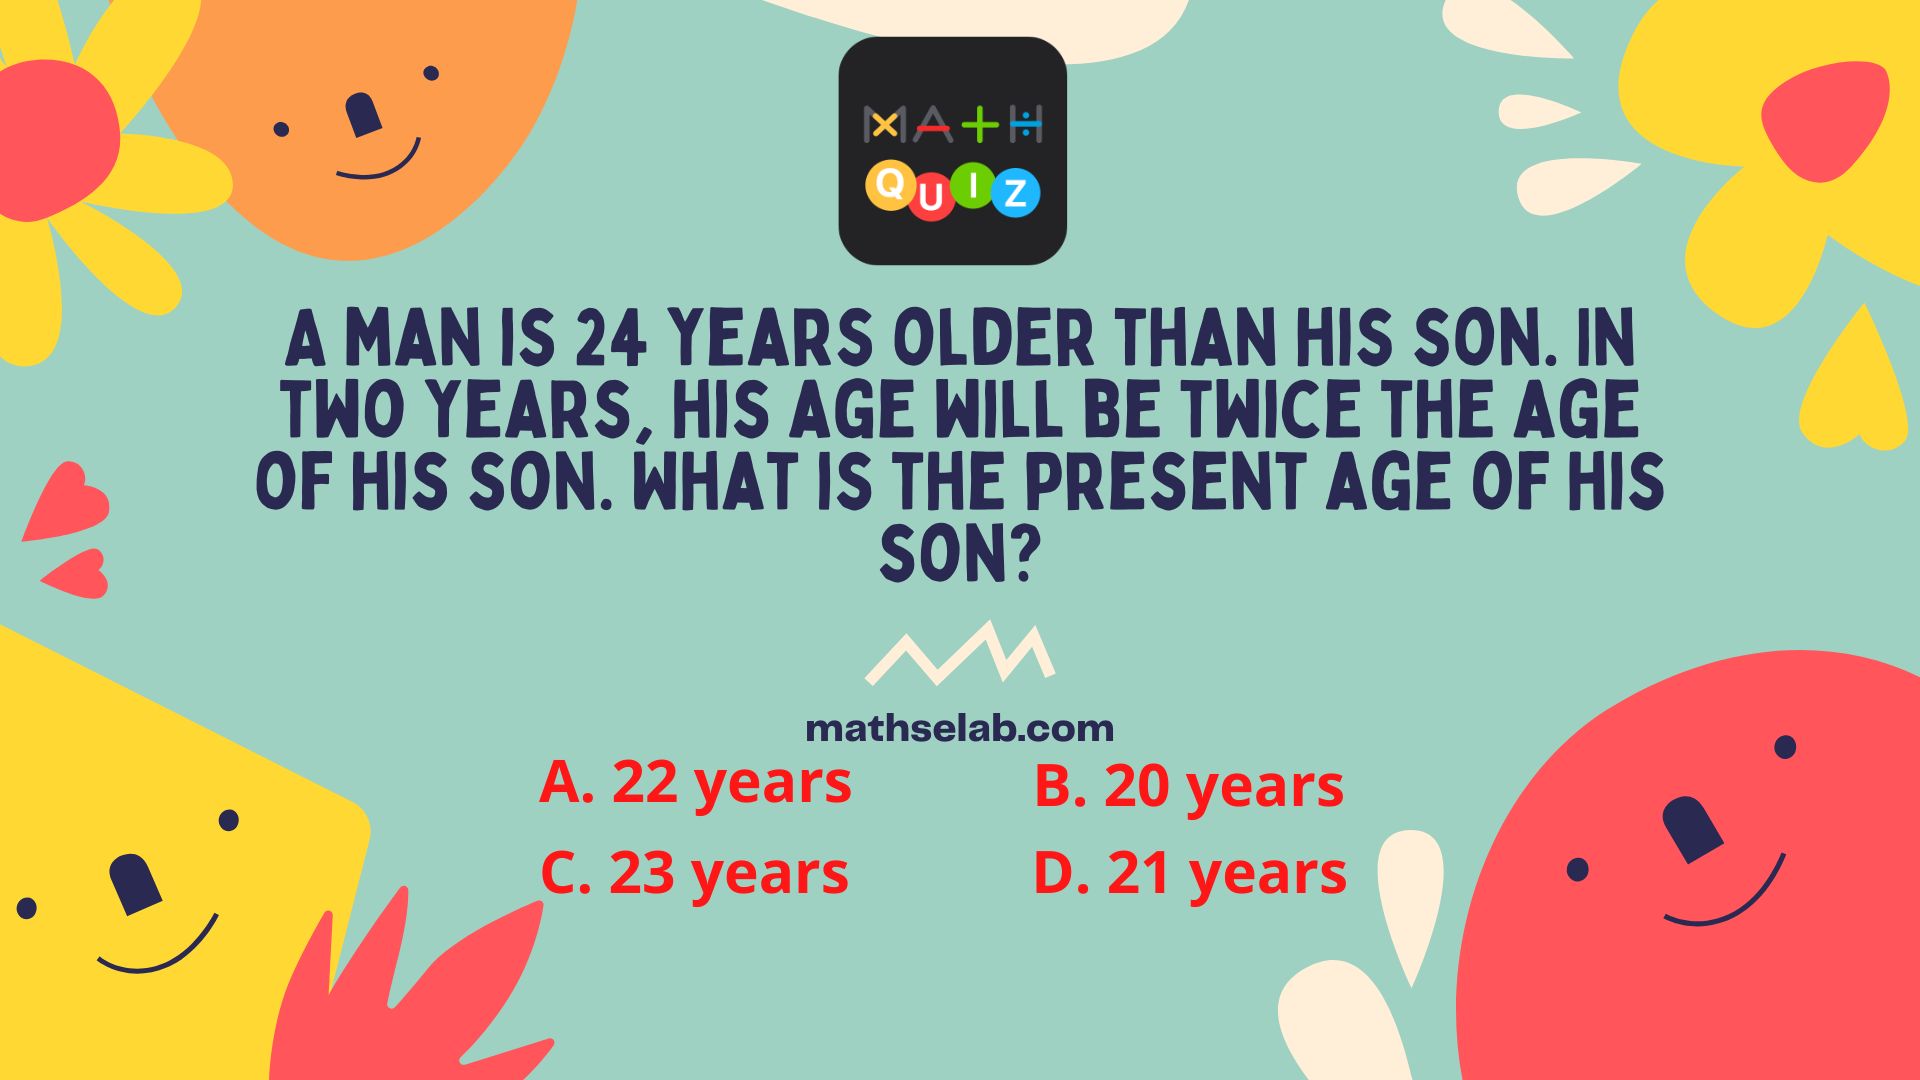 A man is 24 years older than his son. In two years, his age will be twice the age of his son. What is the present age of his son?